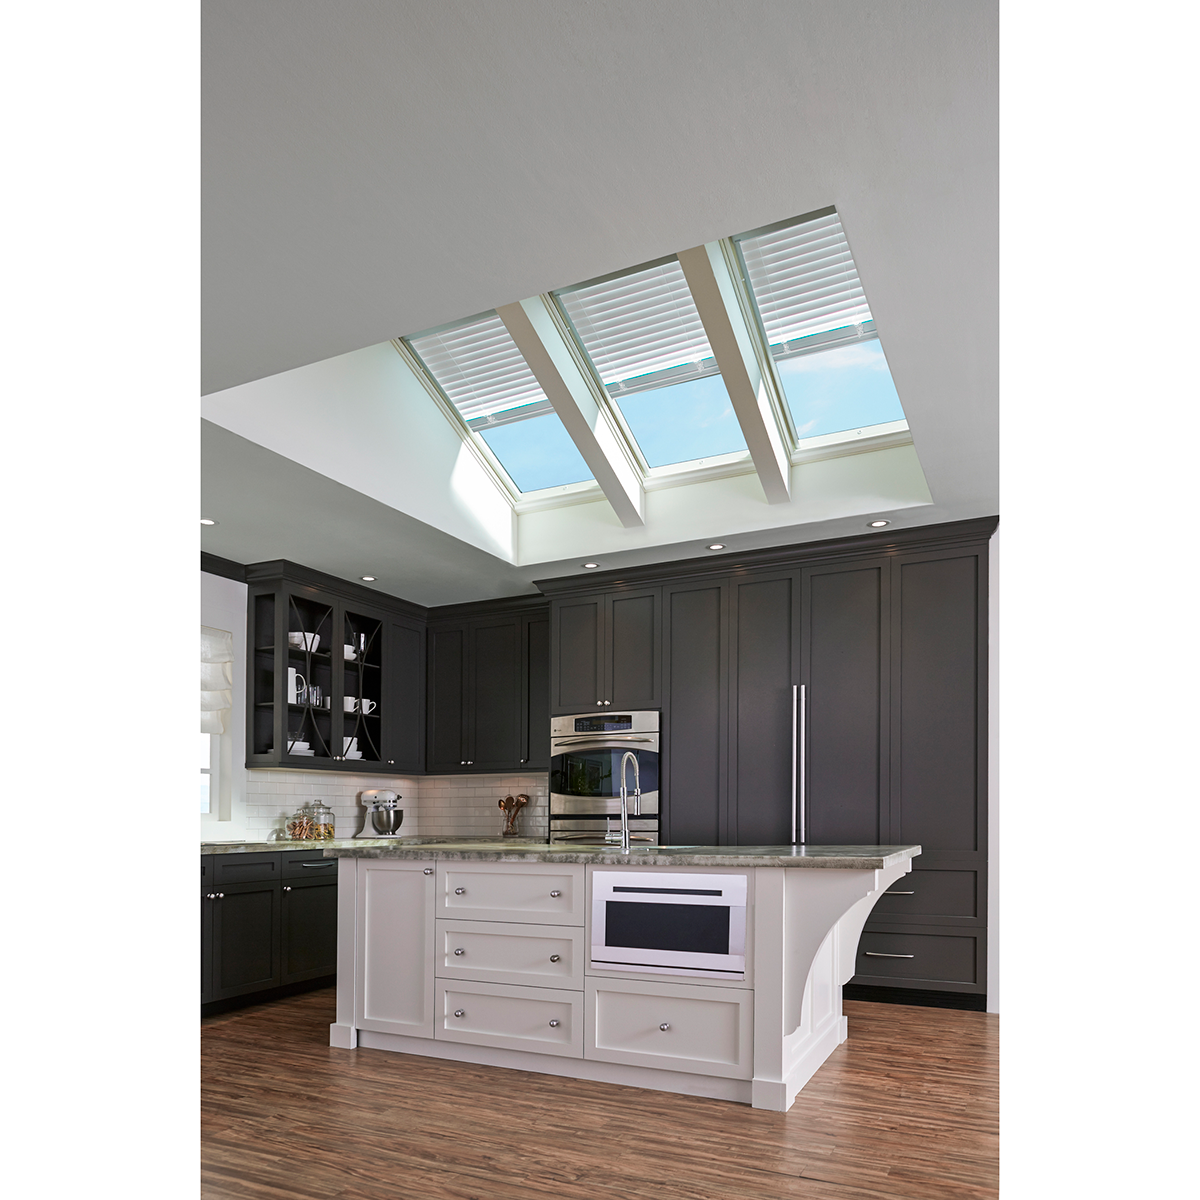 Fixed Curb-Mount Skylight with Laminated Low-E3 Glass - 30-1/2 in. x 30-1/2 in. - FCM 3030